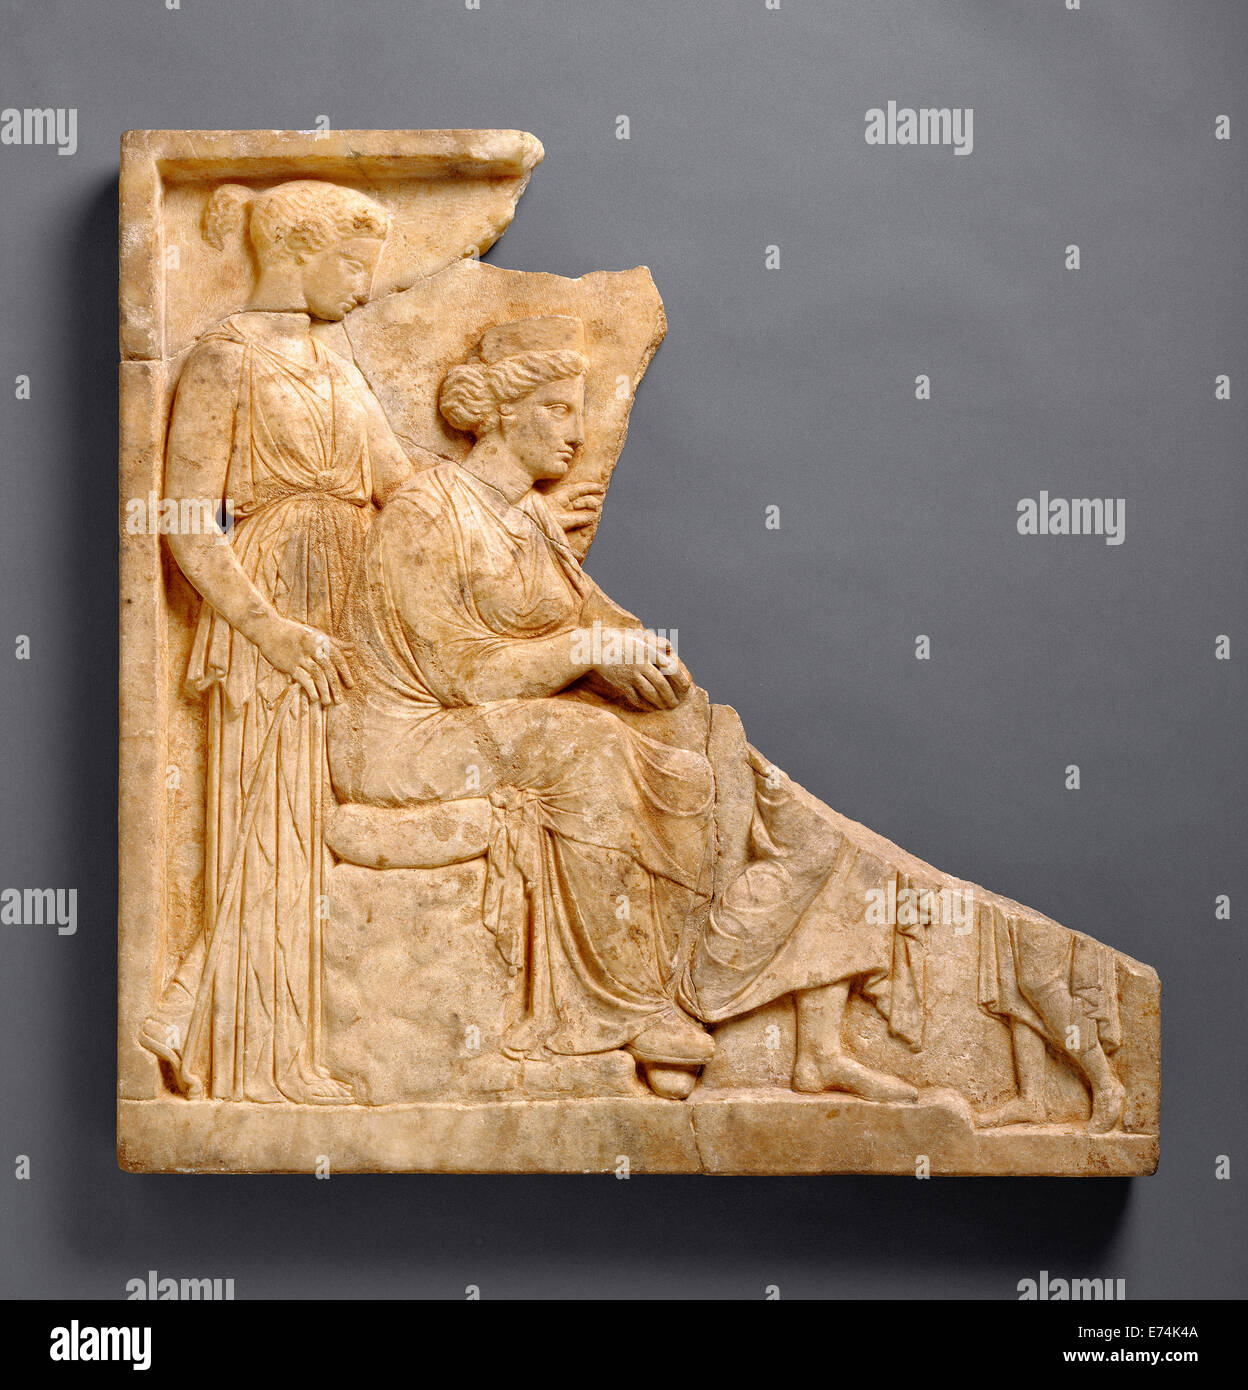 Votive Relief to Demeter and Kore; Unknown; Greece, Europe; 425 - 400 B.C.; Marble; Object: H: 53 x W: 53 x D (edge): 3.9 cm (20 Stock Photo